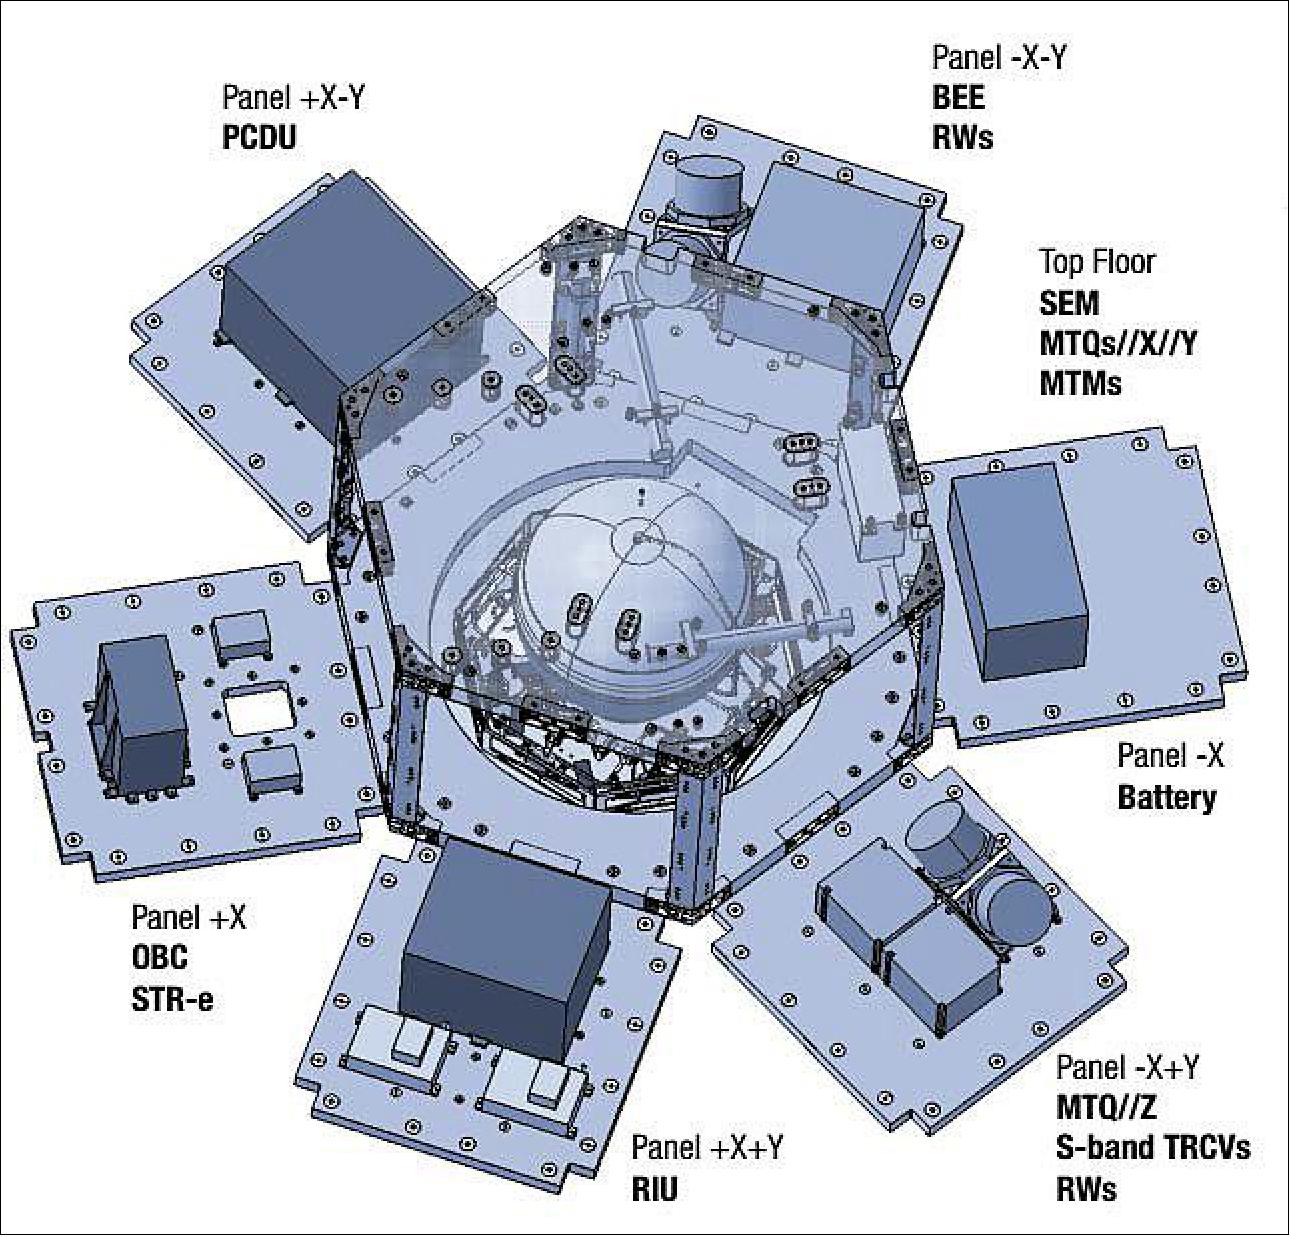 Figure 8: Satellite units’ layout in the hexagonal body surfaces (image credit: Airbus DS)